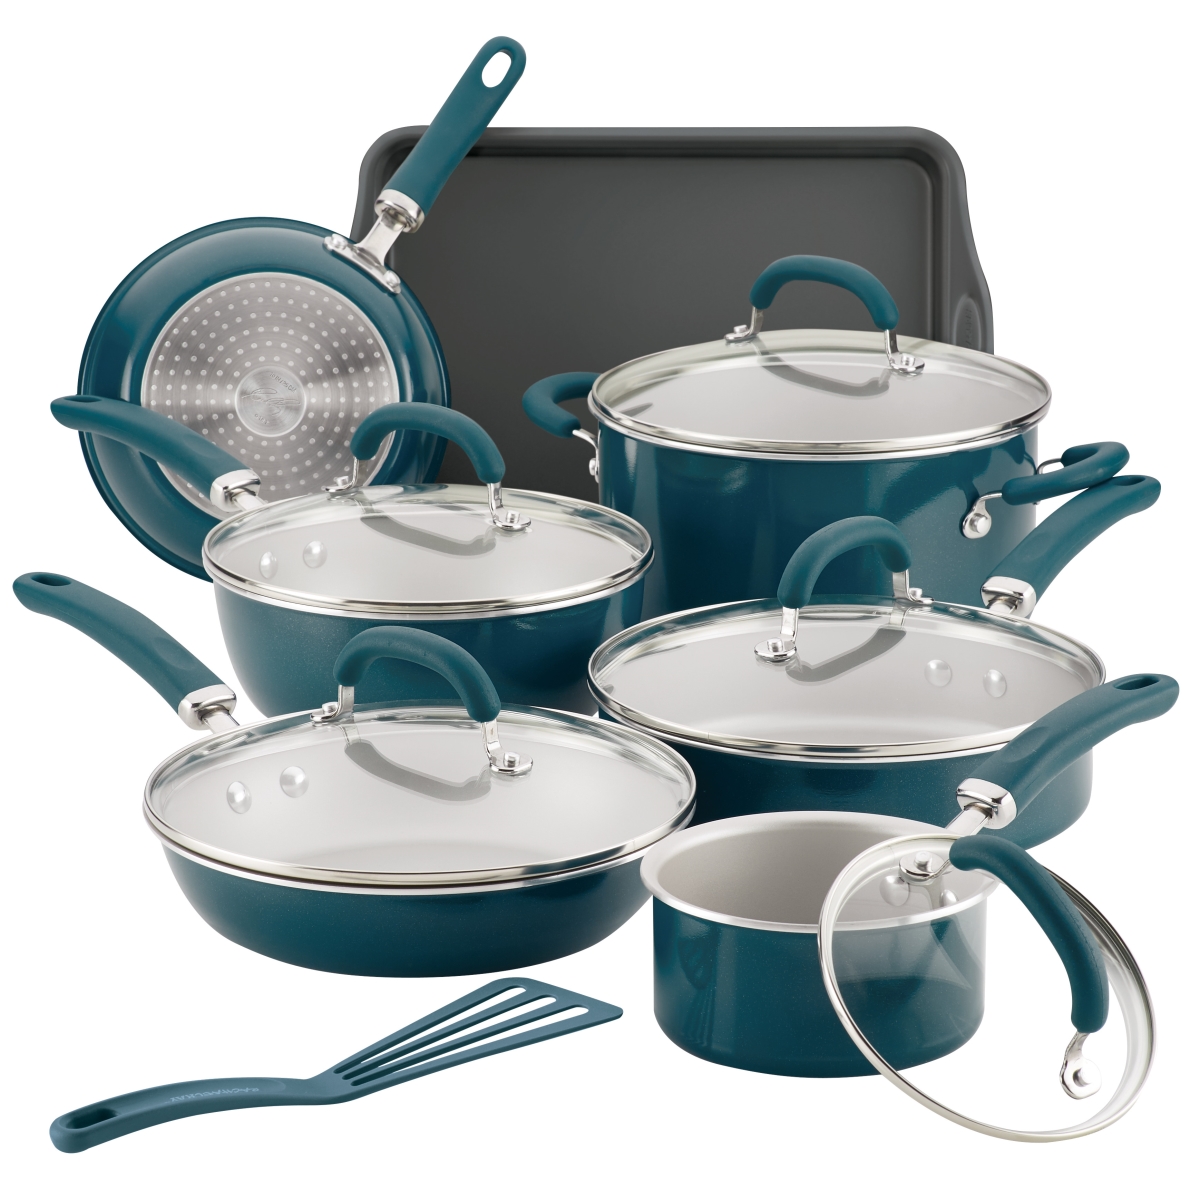 Rachael Ray 12144 Create Delicious Aluminum Nonstick Cookware Set, 13 Piece - Teal Shimmer